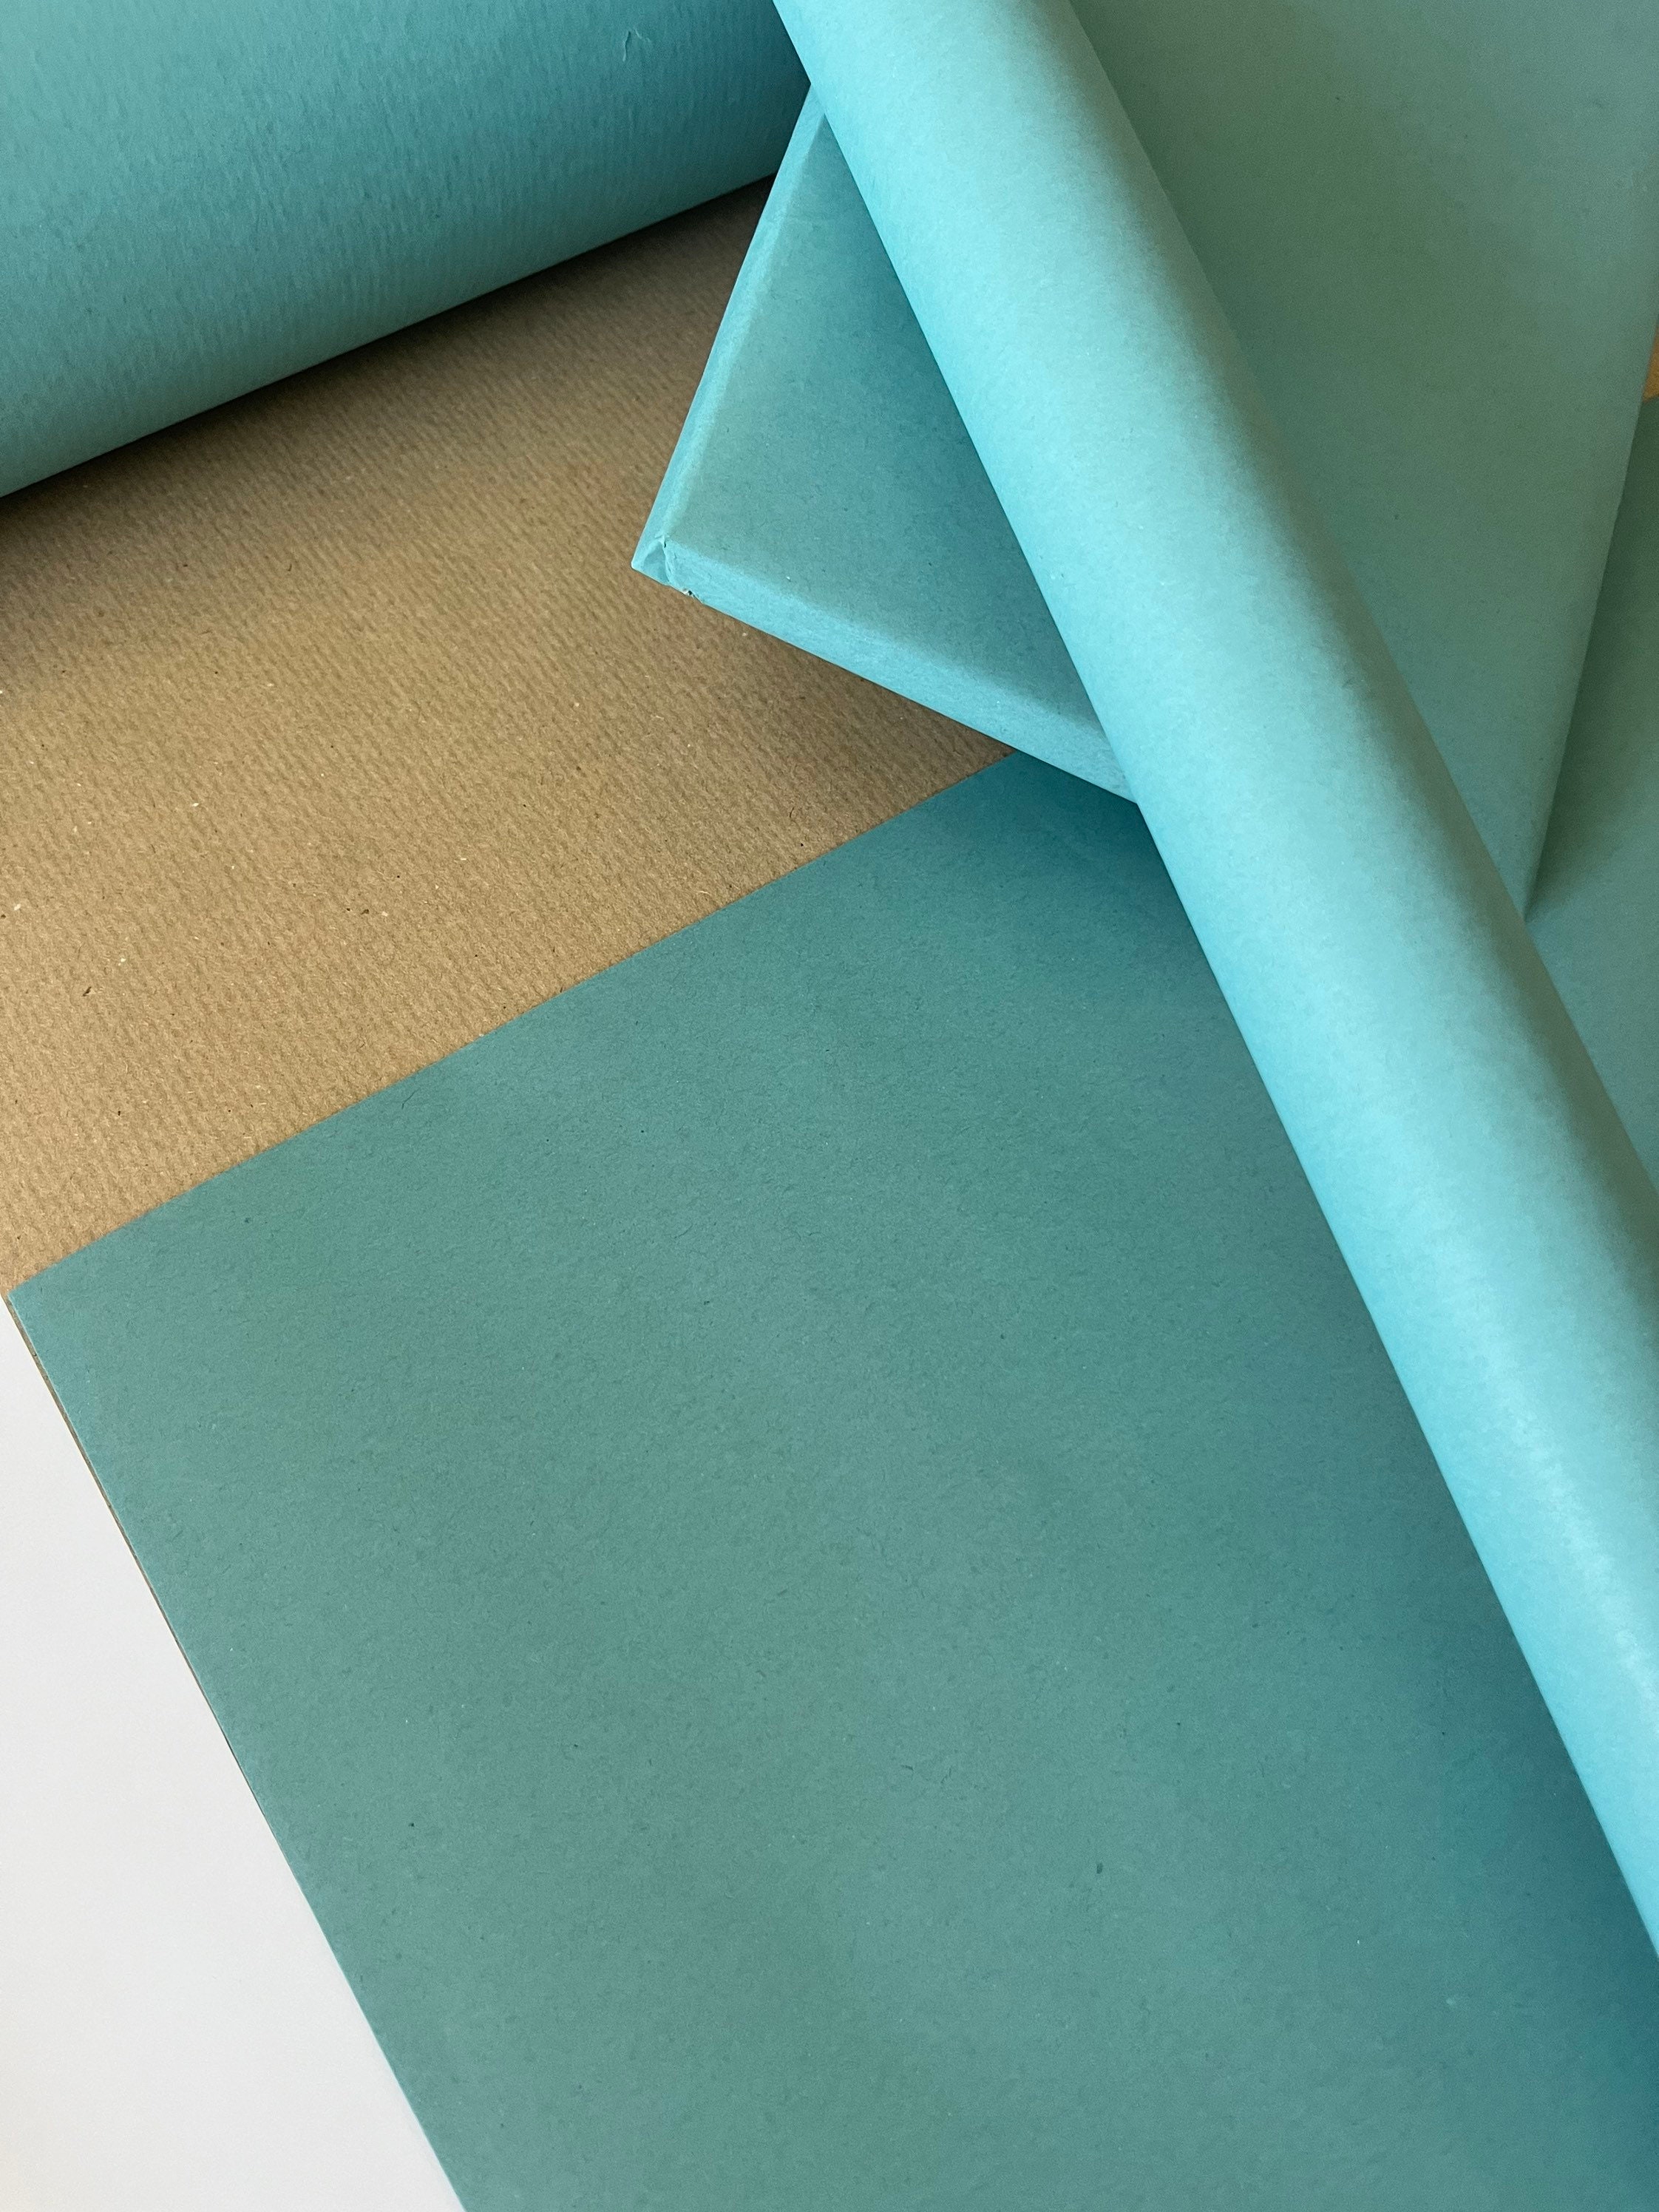 Shades of Teal Premium Tissue Paper, Premium Gift Wrap, Green Gift